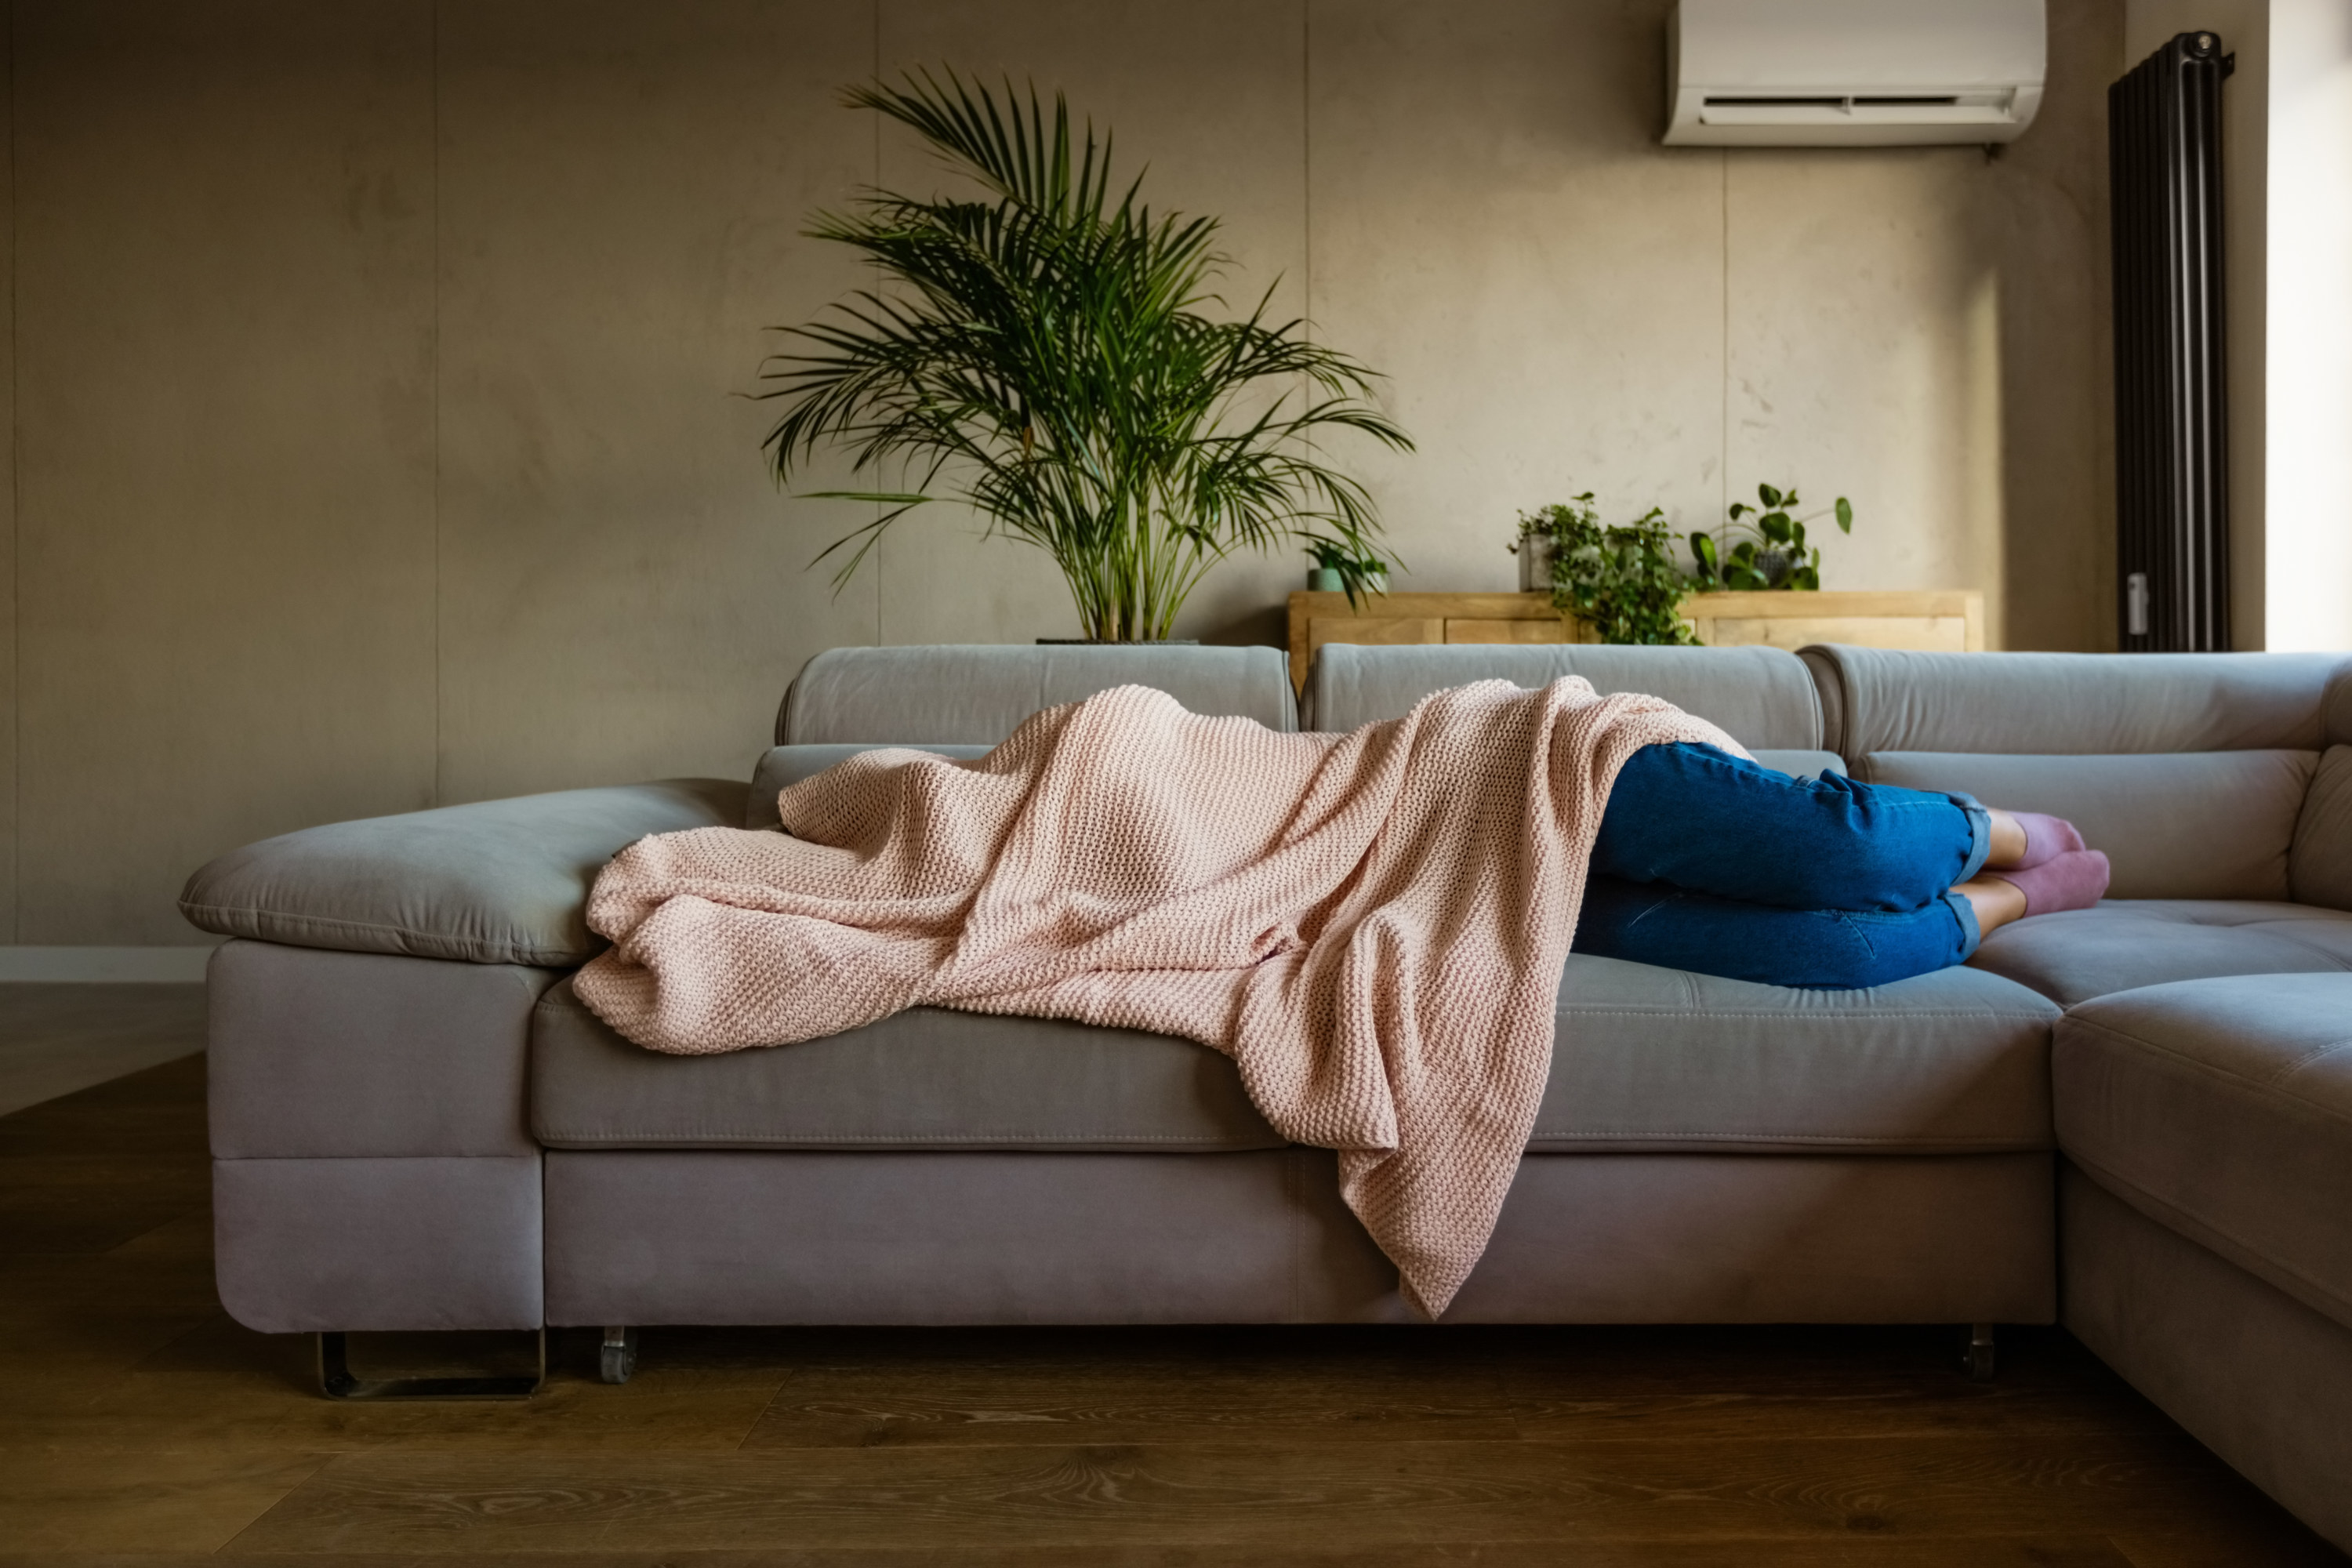 Young woman lying down on sofa in living room covered by blanket.